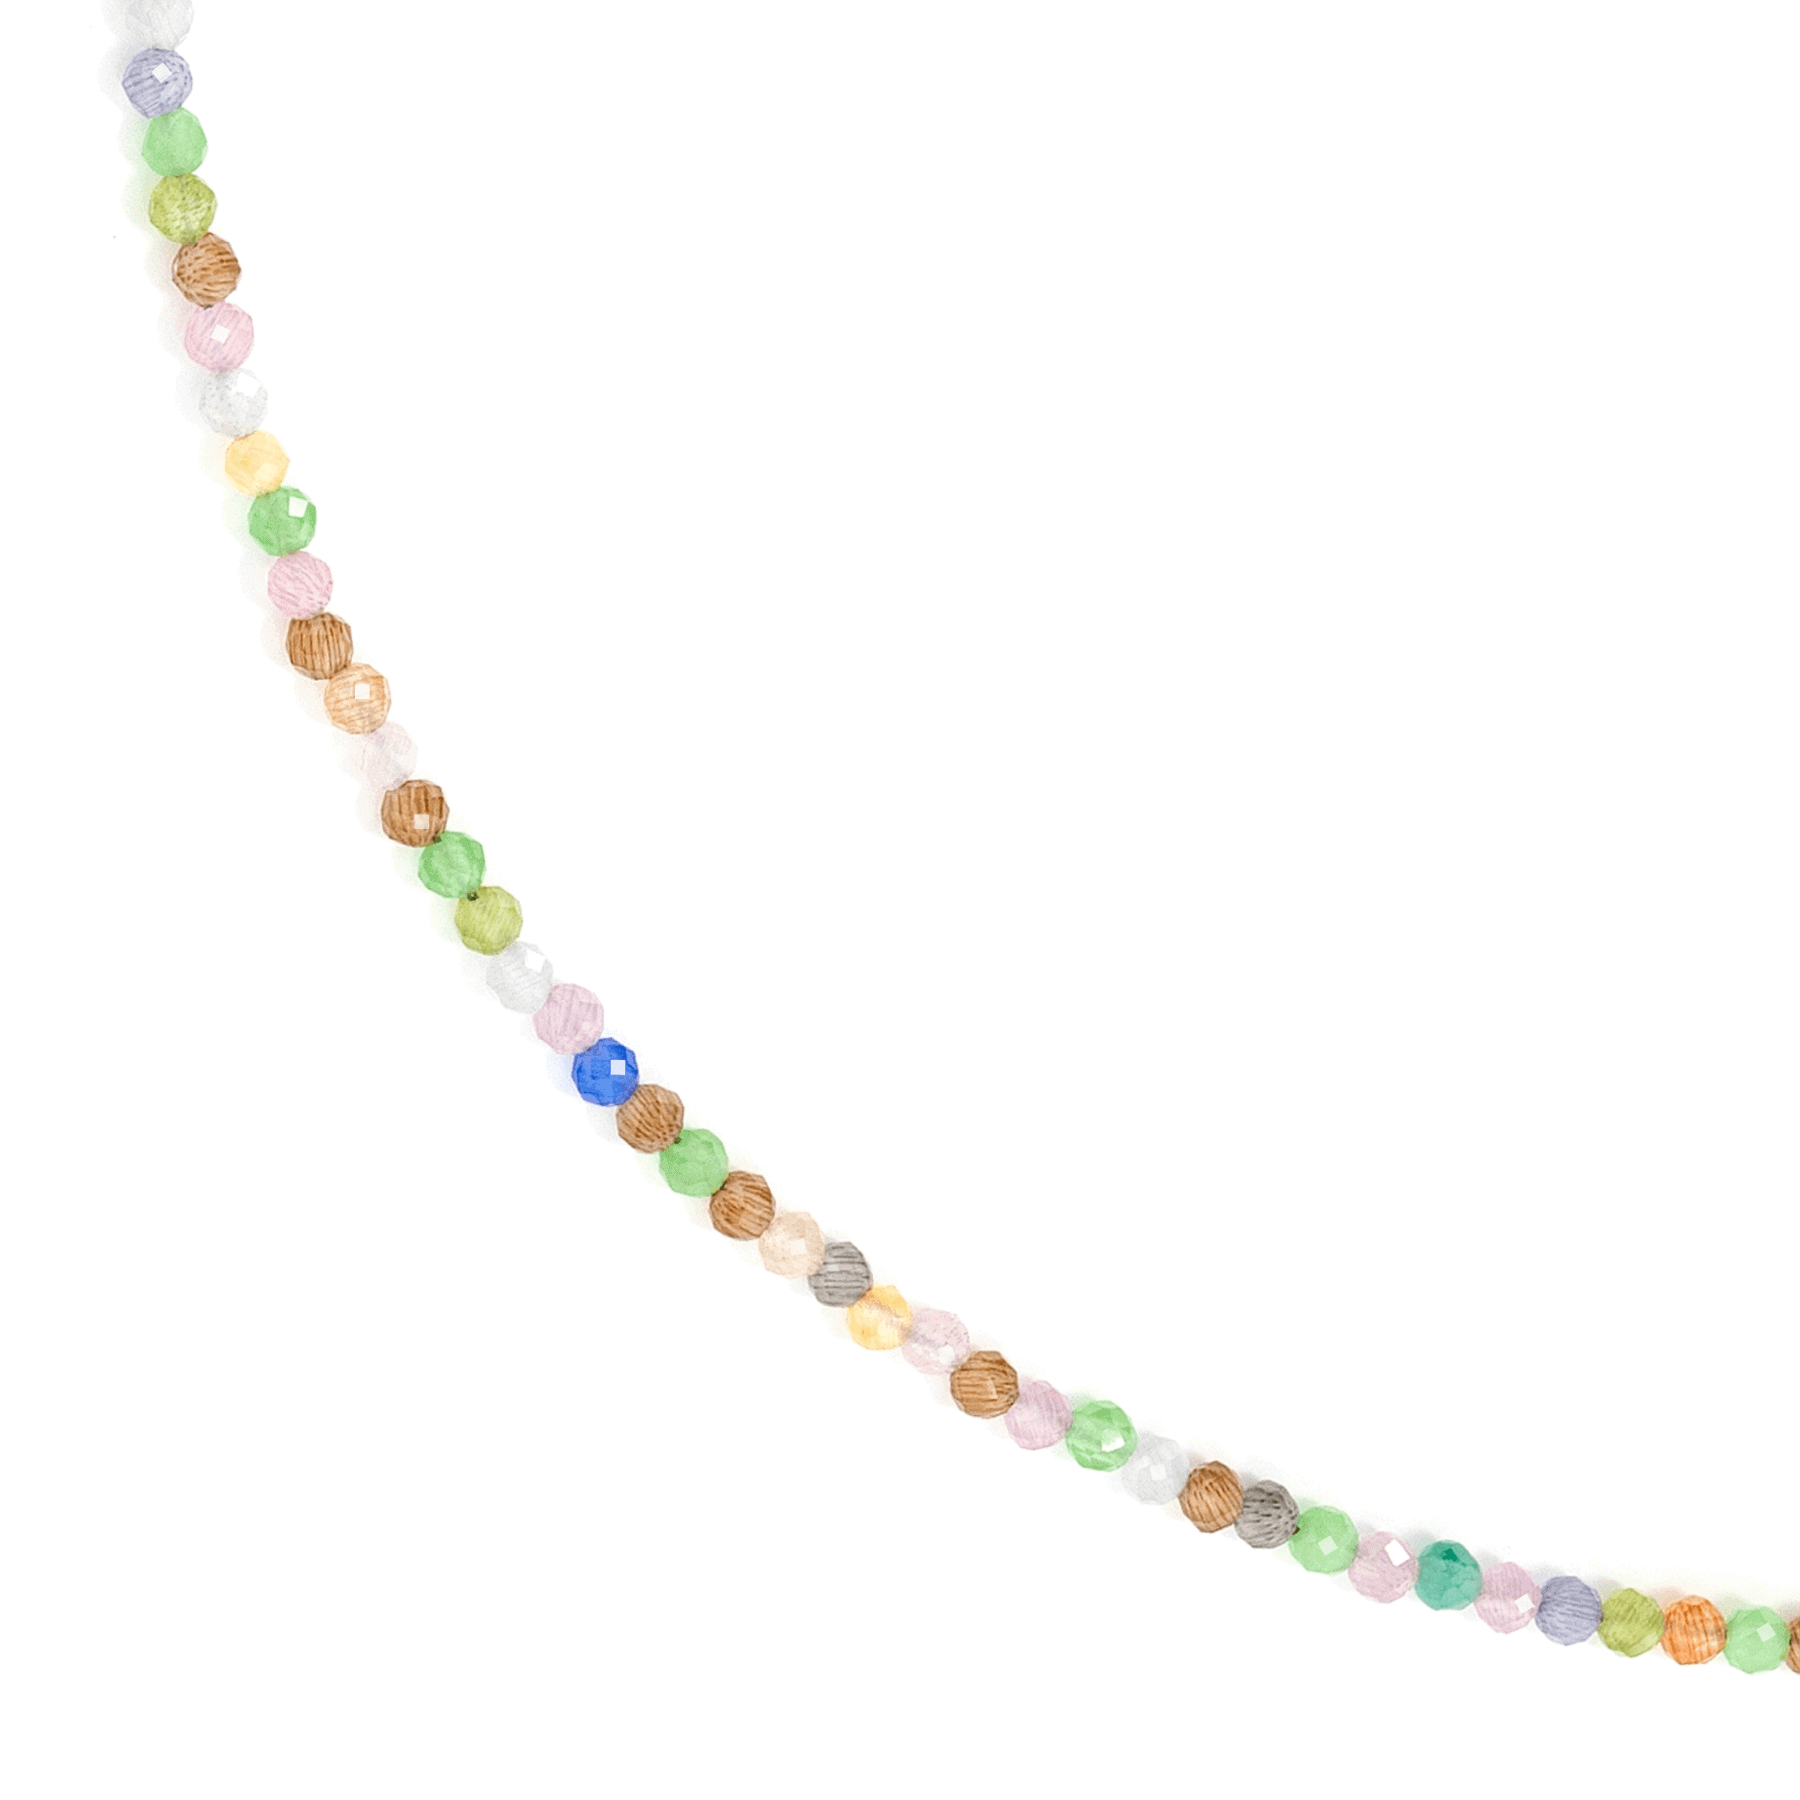 Colorful neck choker from gemstones on white background